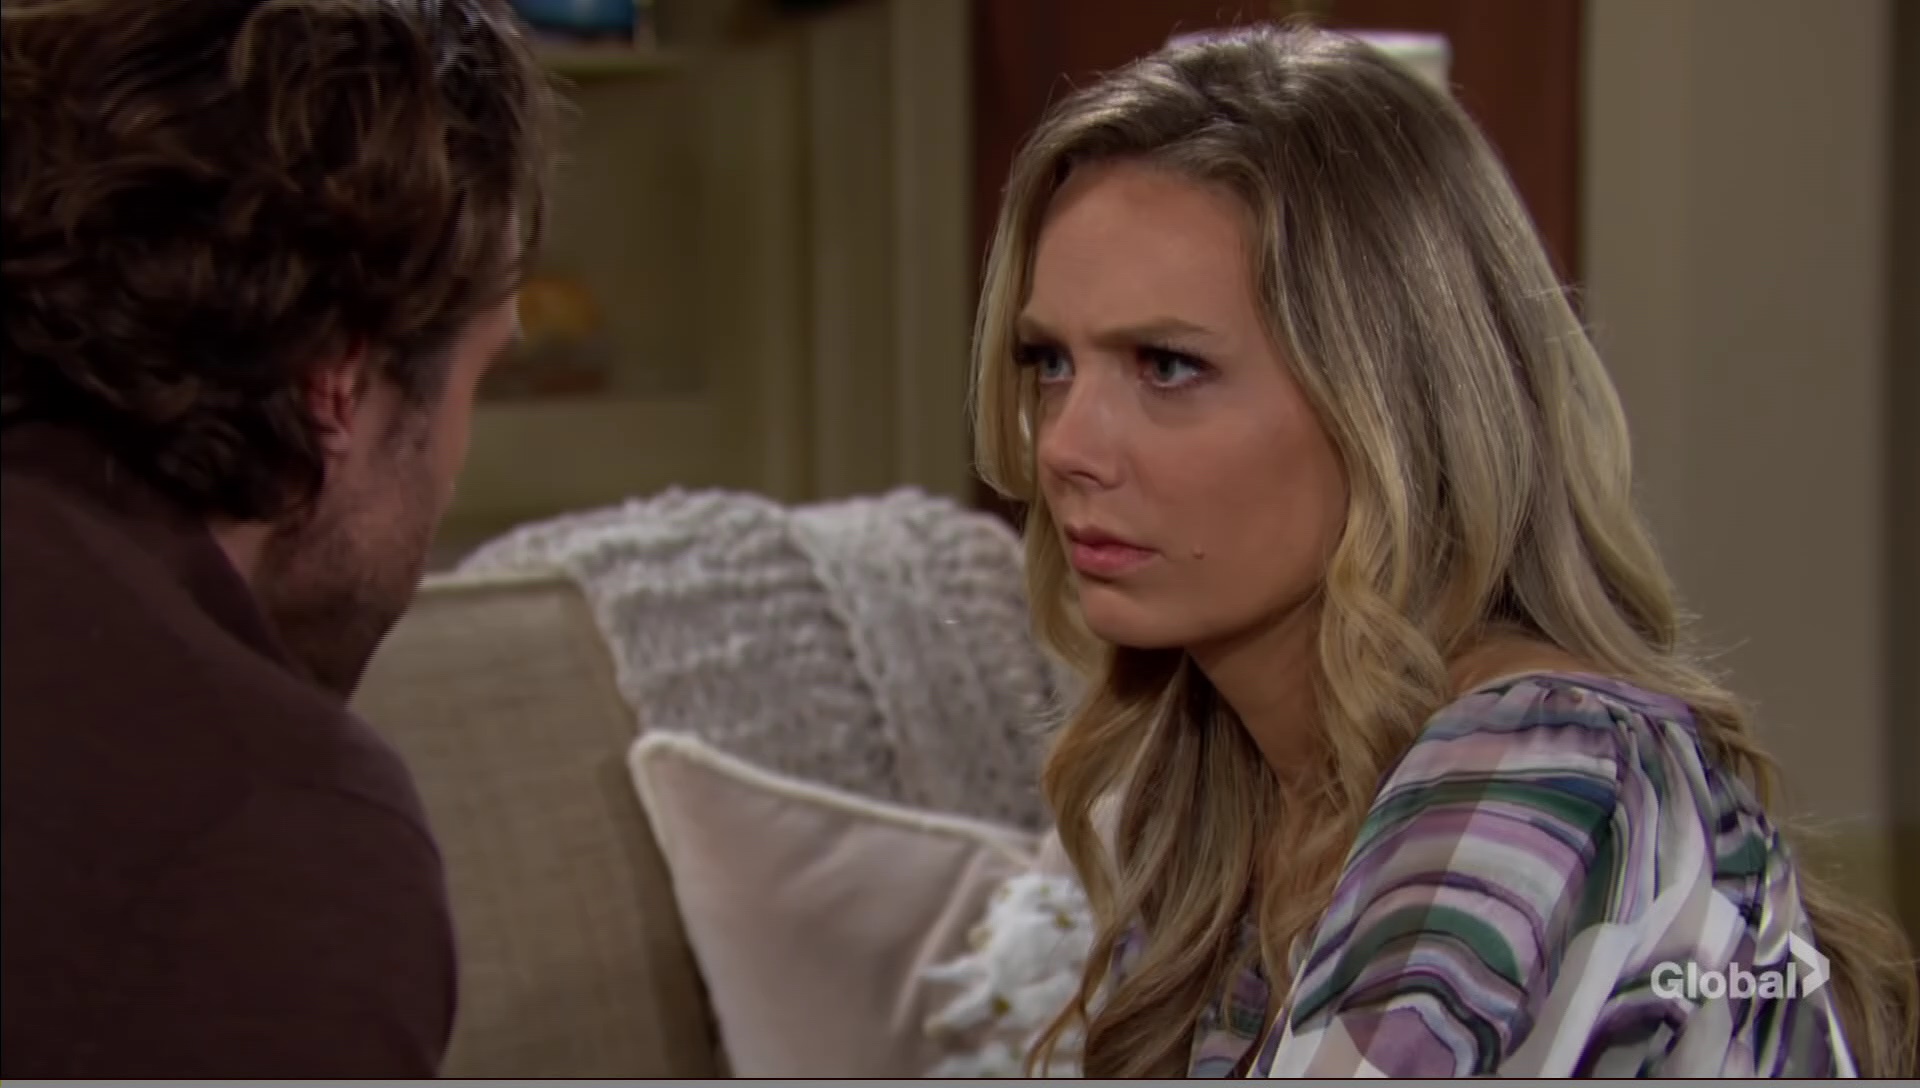 abby petulant young restless